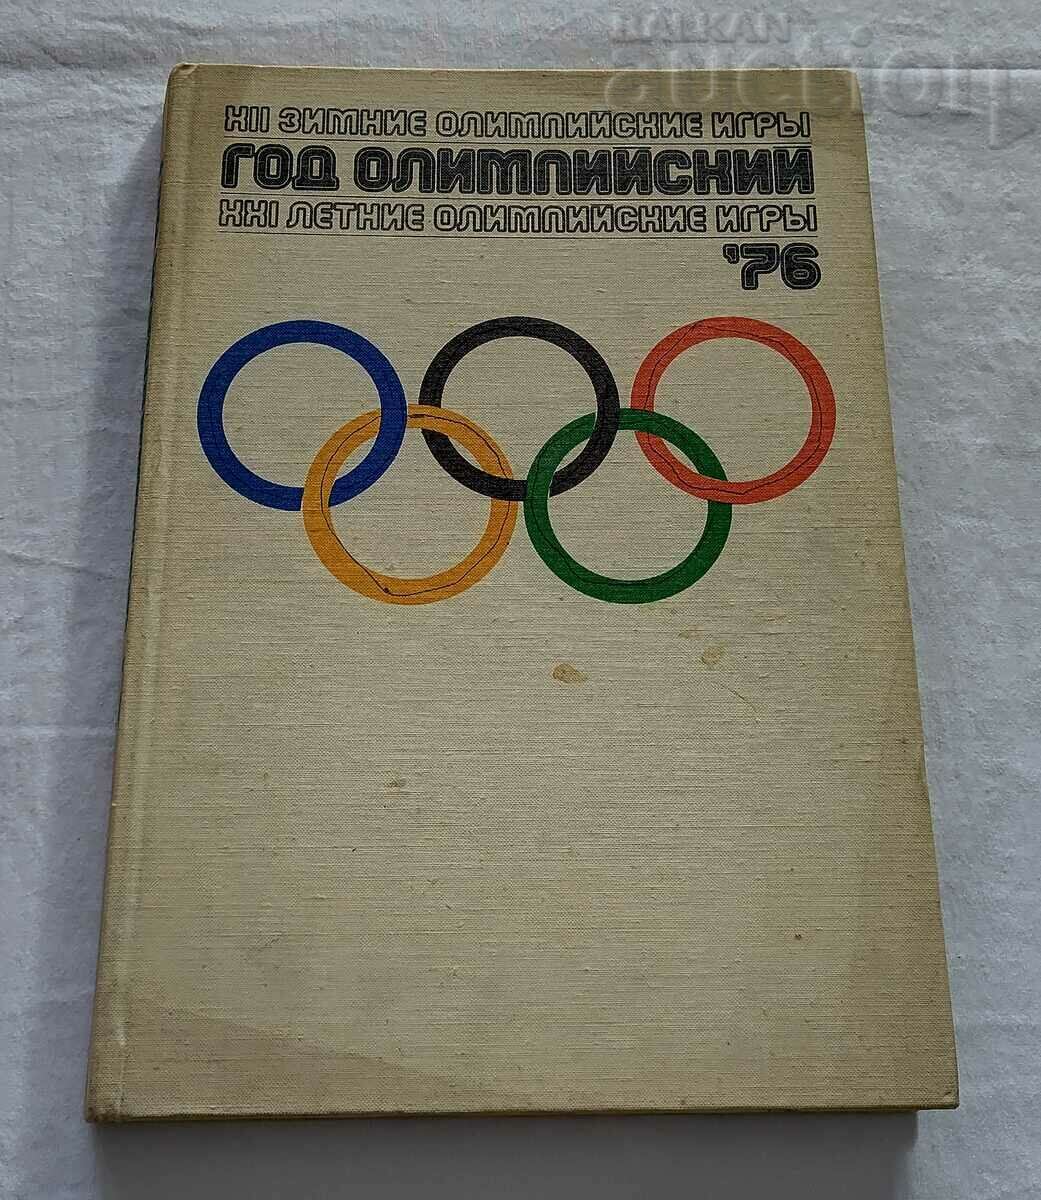 XII WINTER XXI SUMMER OLYMPIC GAMES 1976 ALBUM REFERENCE